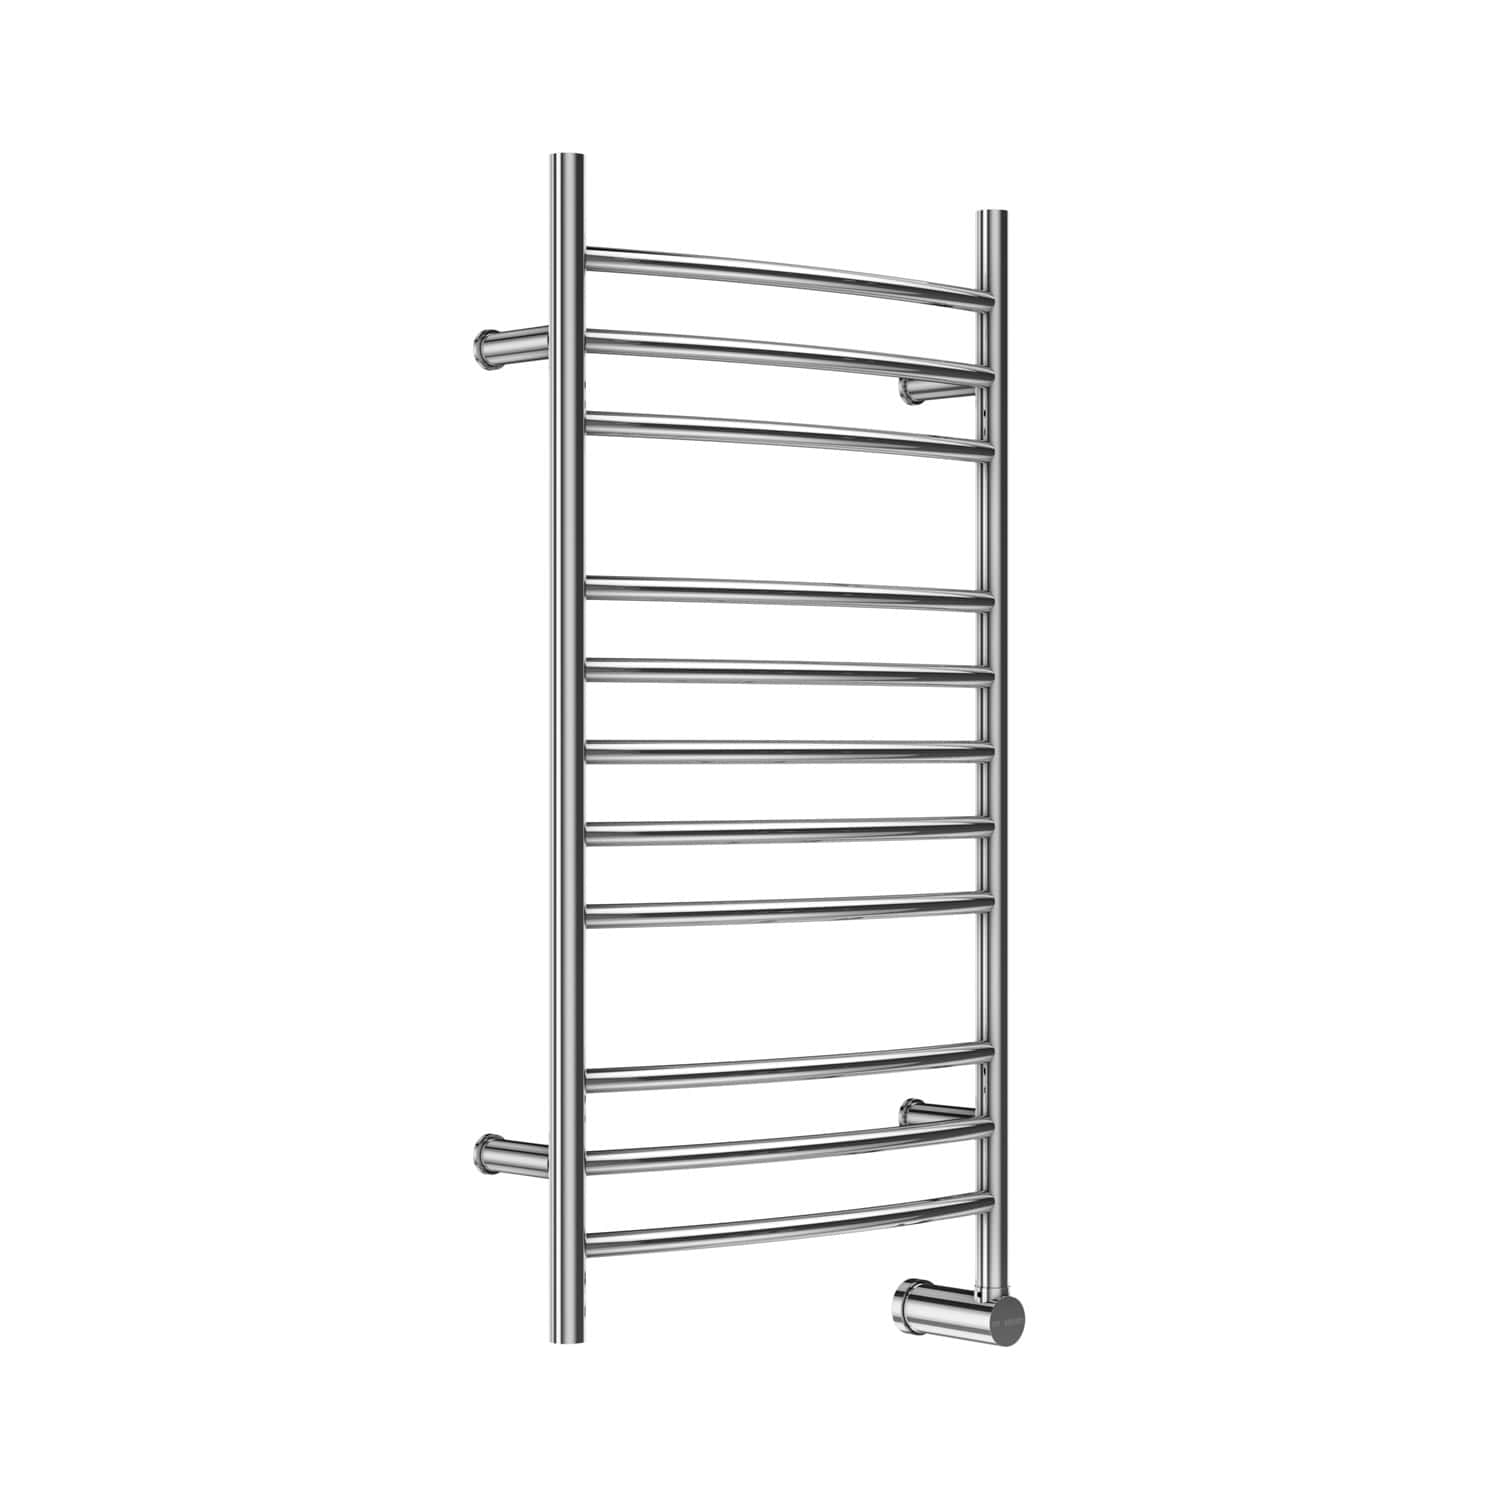 Mr. Steam Metro Collection® 11-Bar Wall-Mounted Electric Towel Warmer with Digital Timer in Stainless Steel Brushed